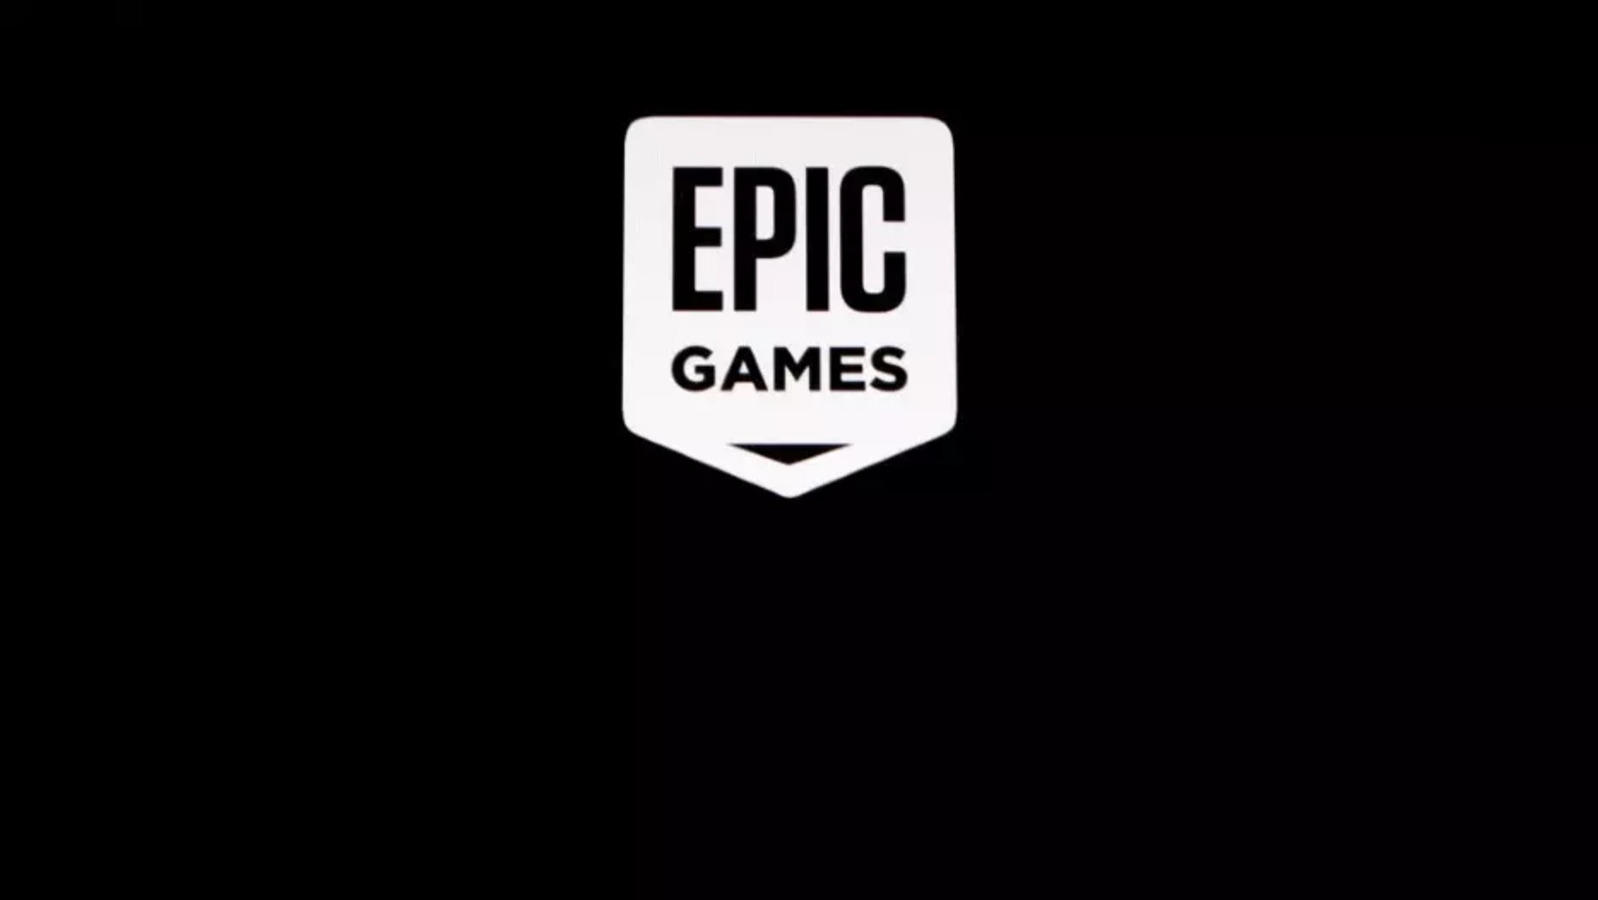 Epic Games: Epic Games: Company announces free games with 'Mystery